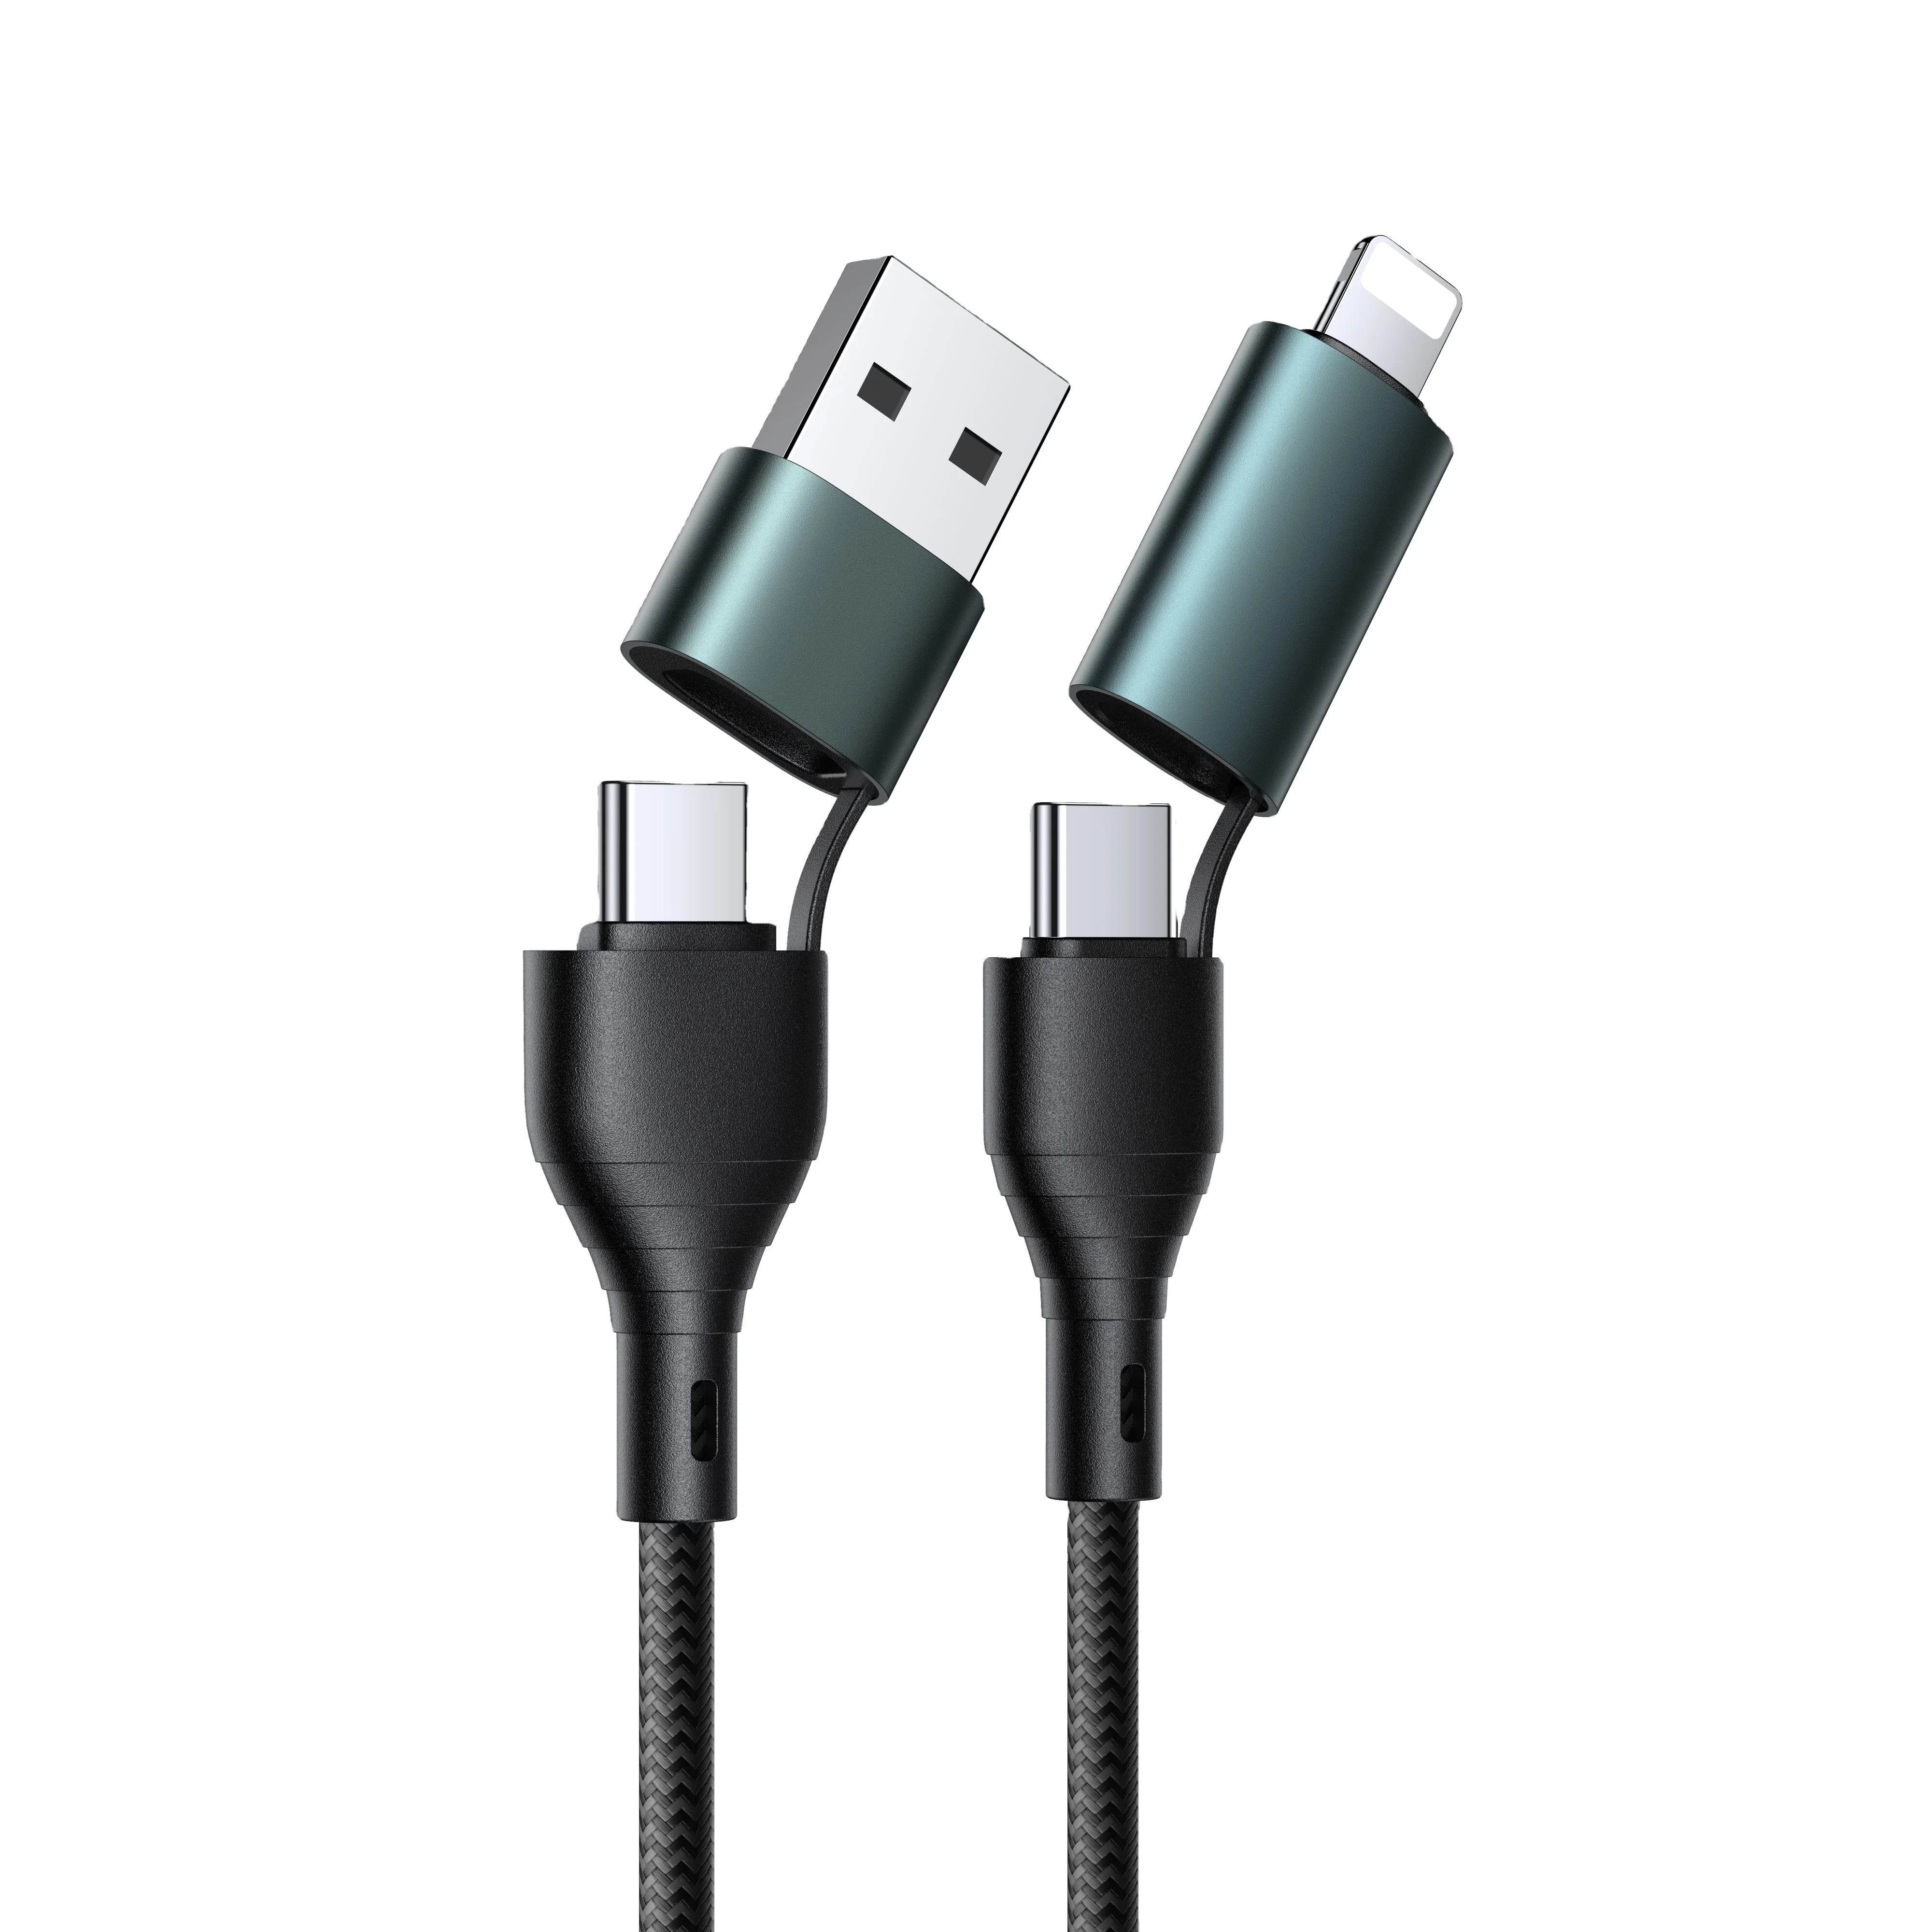 

Jellico New Arrival 60W Fast Charging Usb C Charger Cable With PD cable Data Transmission 4 in 1 usb cables, Black, red, blue